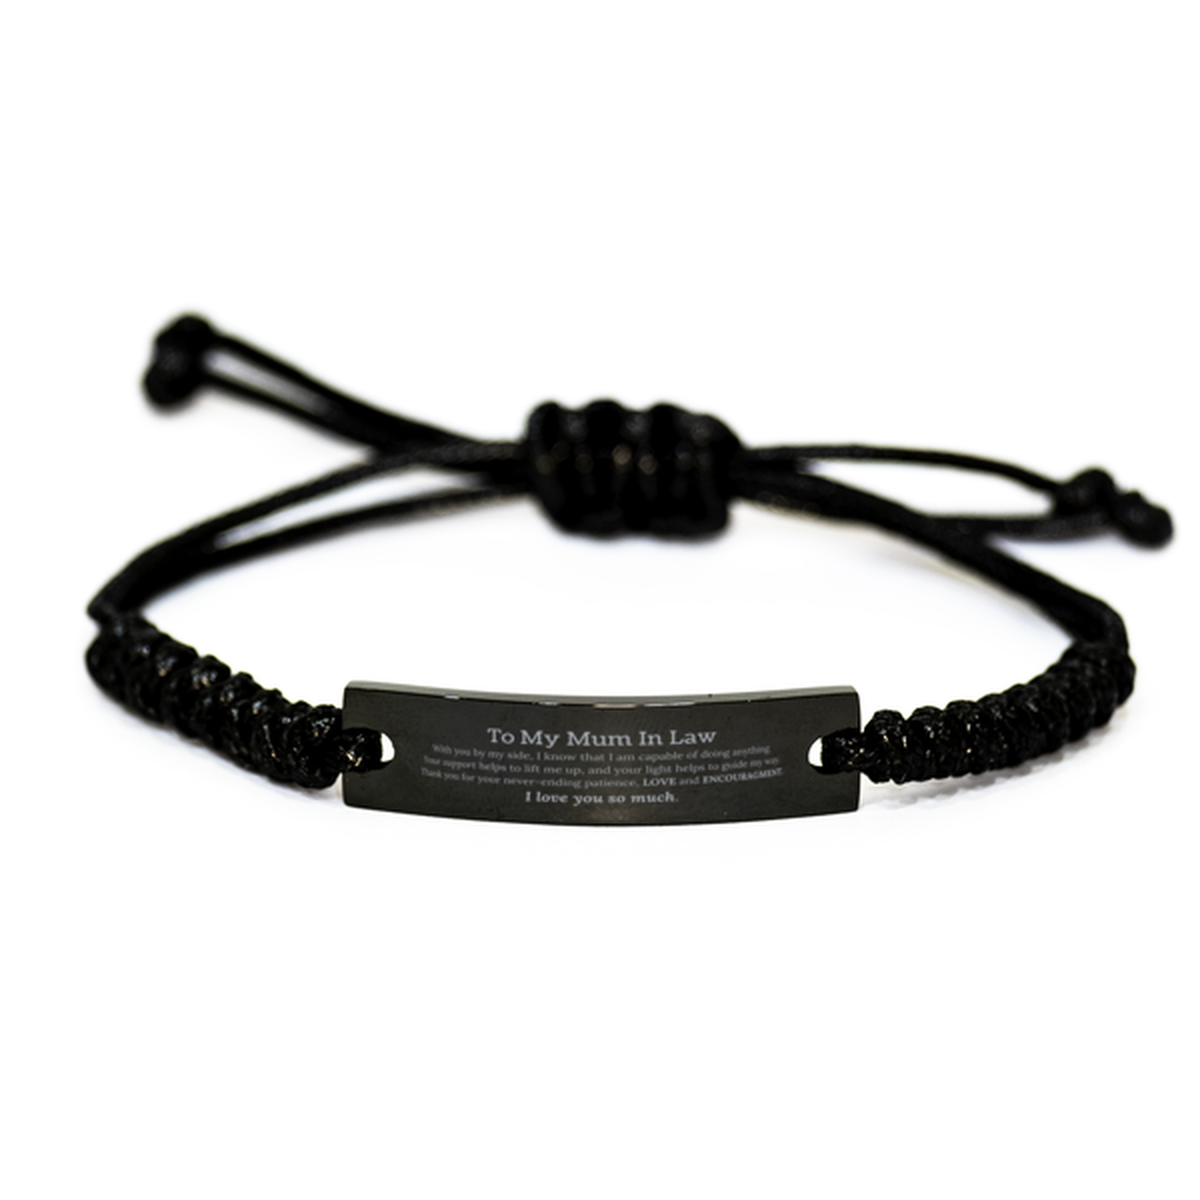 Appreciation Mum In Law  Black Rope Bracelet Gifts, To My Mum In Law  Birthday Christmas Wedding Keepsake Gifts for Mum In Law  With you by my side, I know that I am capable of doing anything. I love you so much